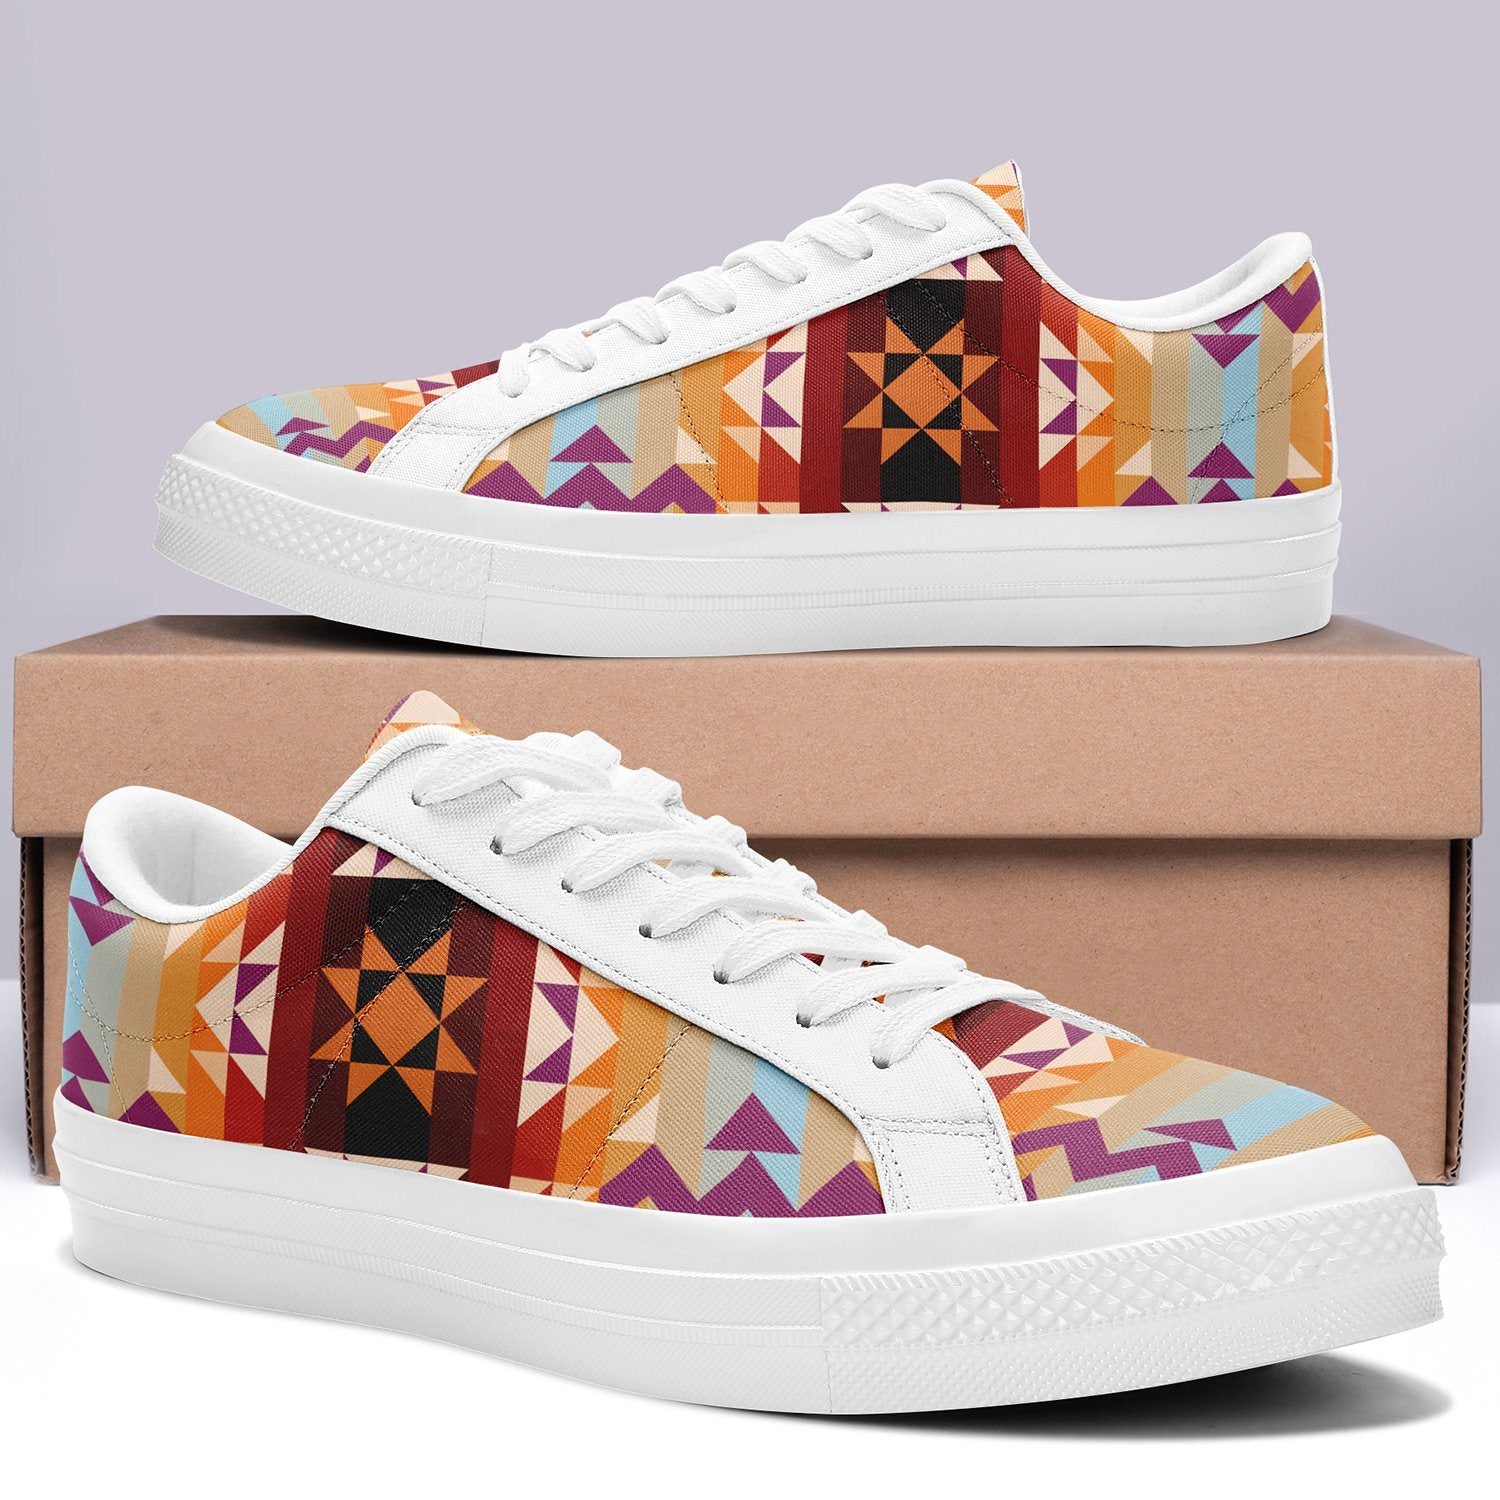 Heatwave Aapisi Low Top Canvas Shoes White Sole aapisi Herman 